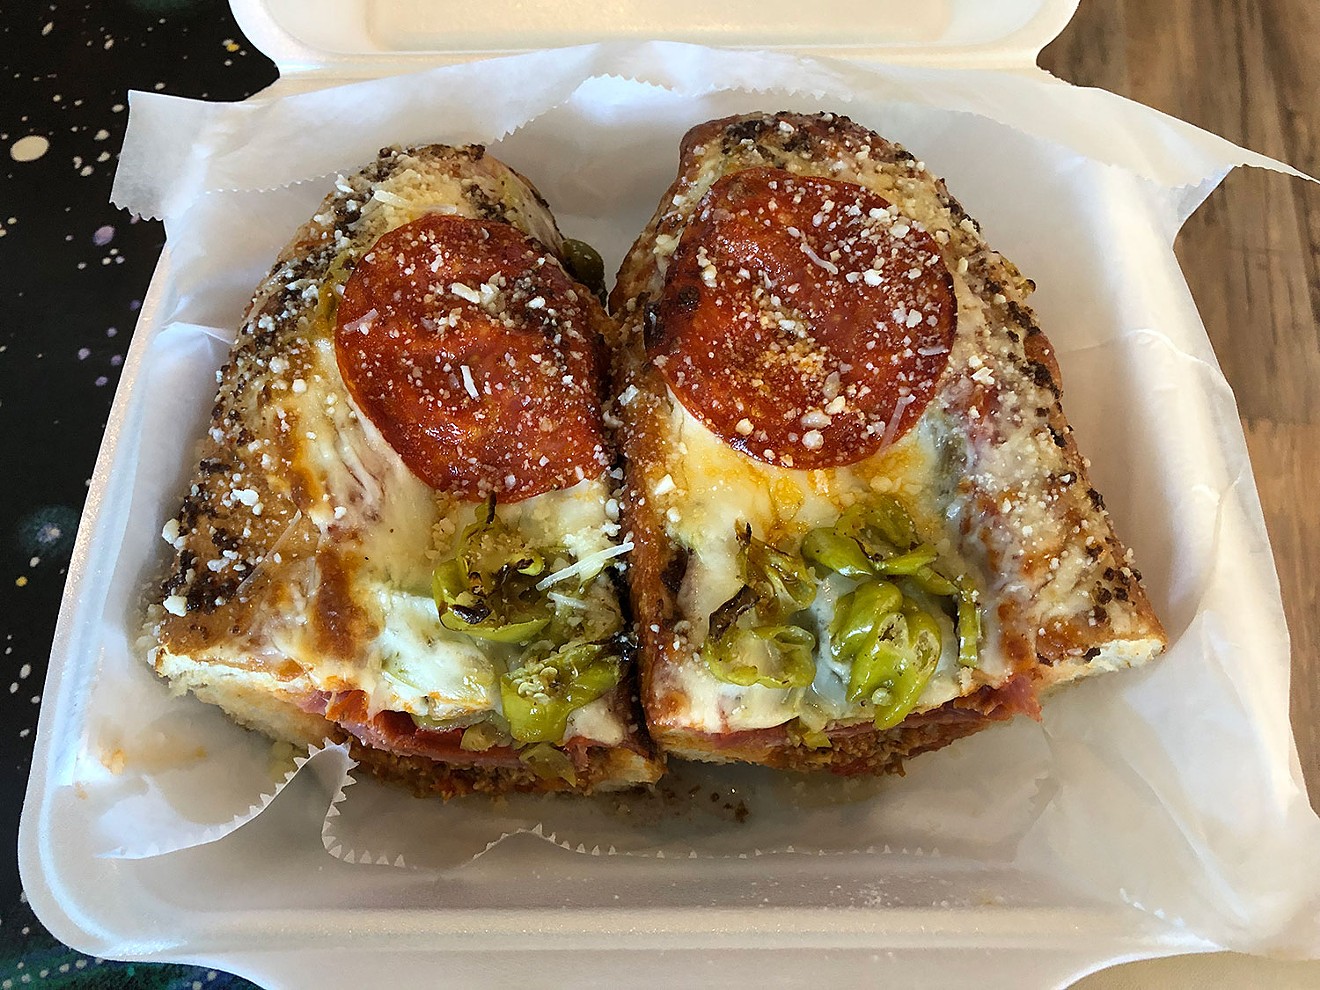 The Lucky Luciano at Tony's Italian Delicatessen in Montgomery is worth the drive, especially because it's so big, you'll have lunch for the next day too.